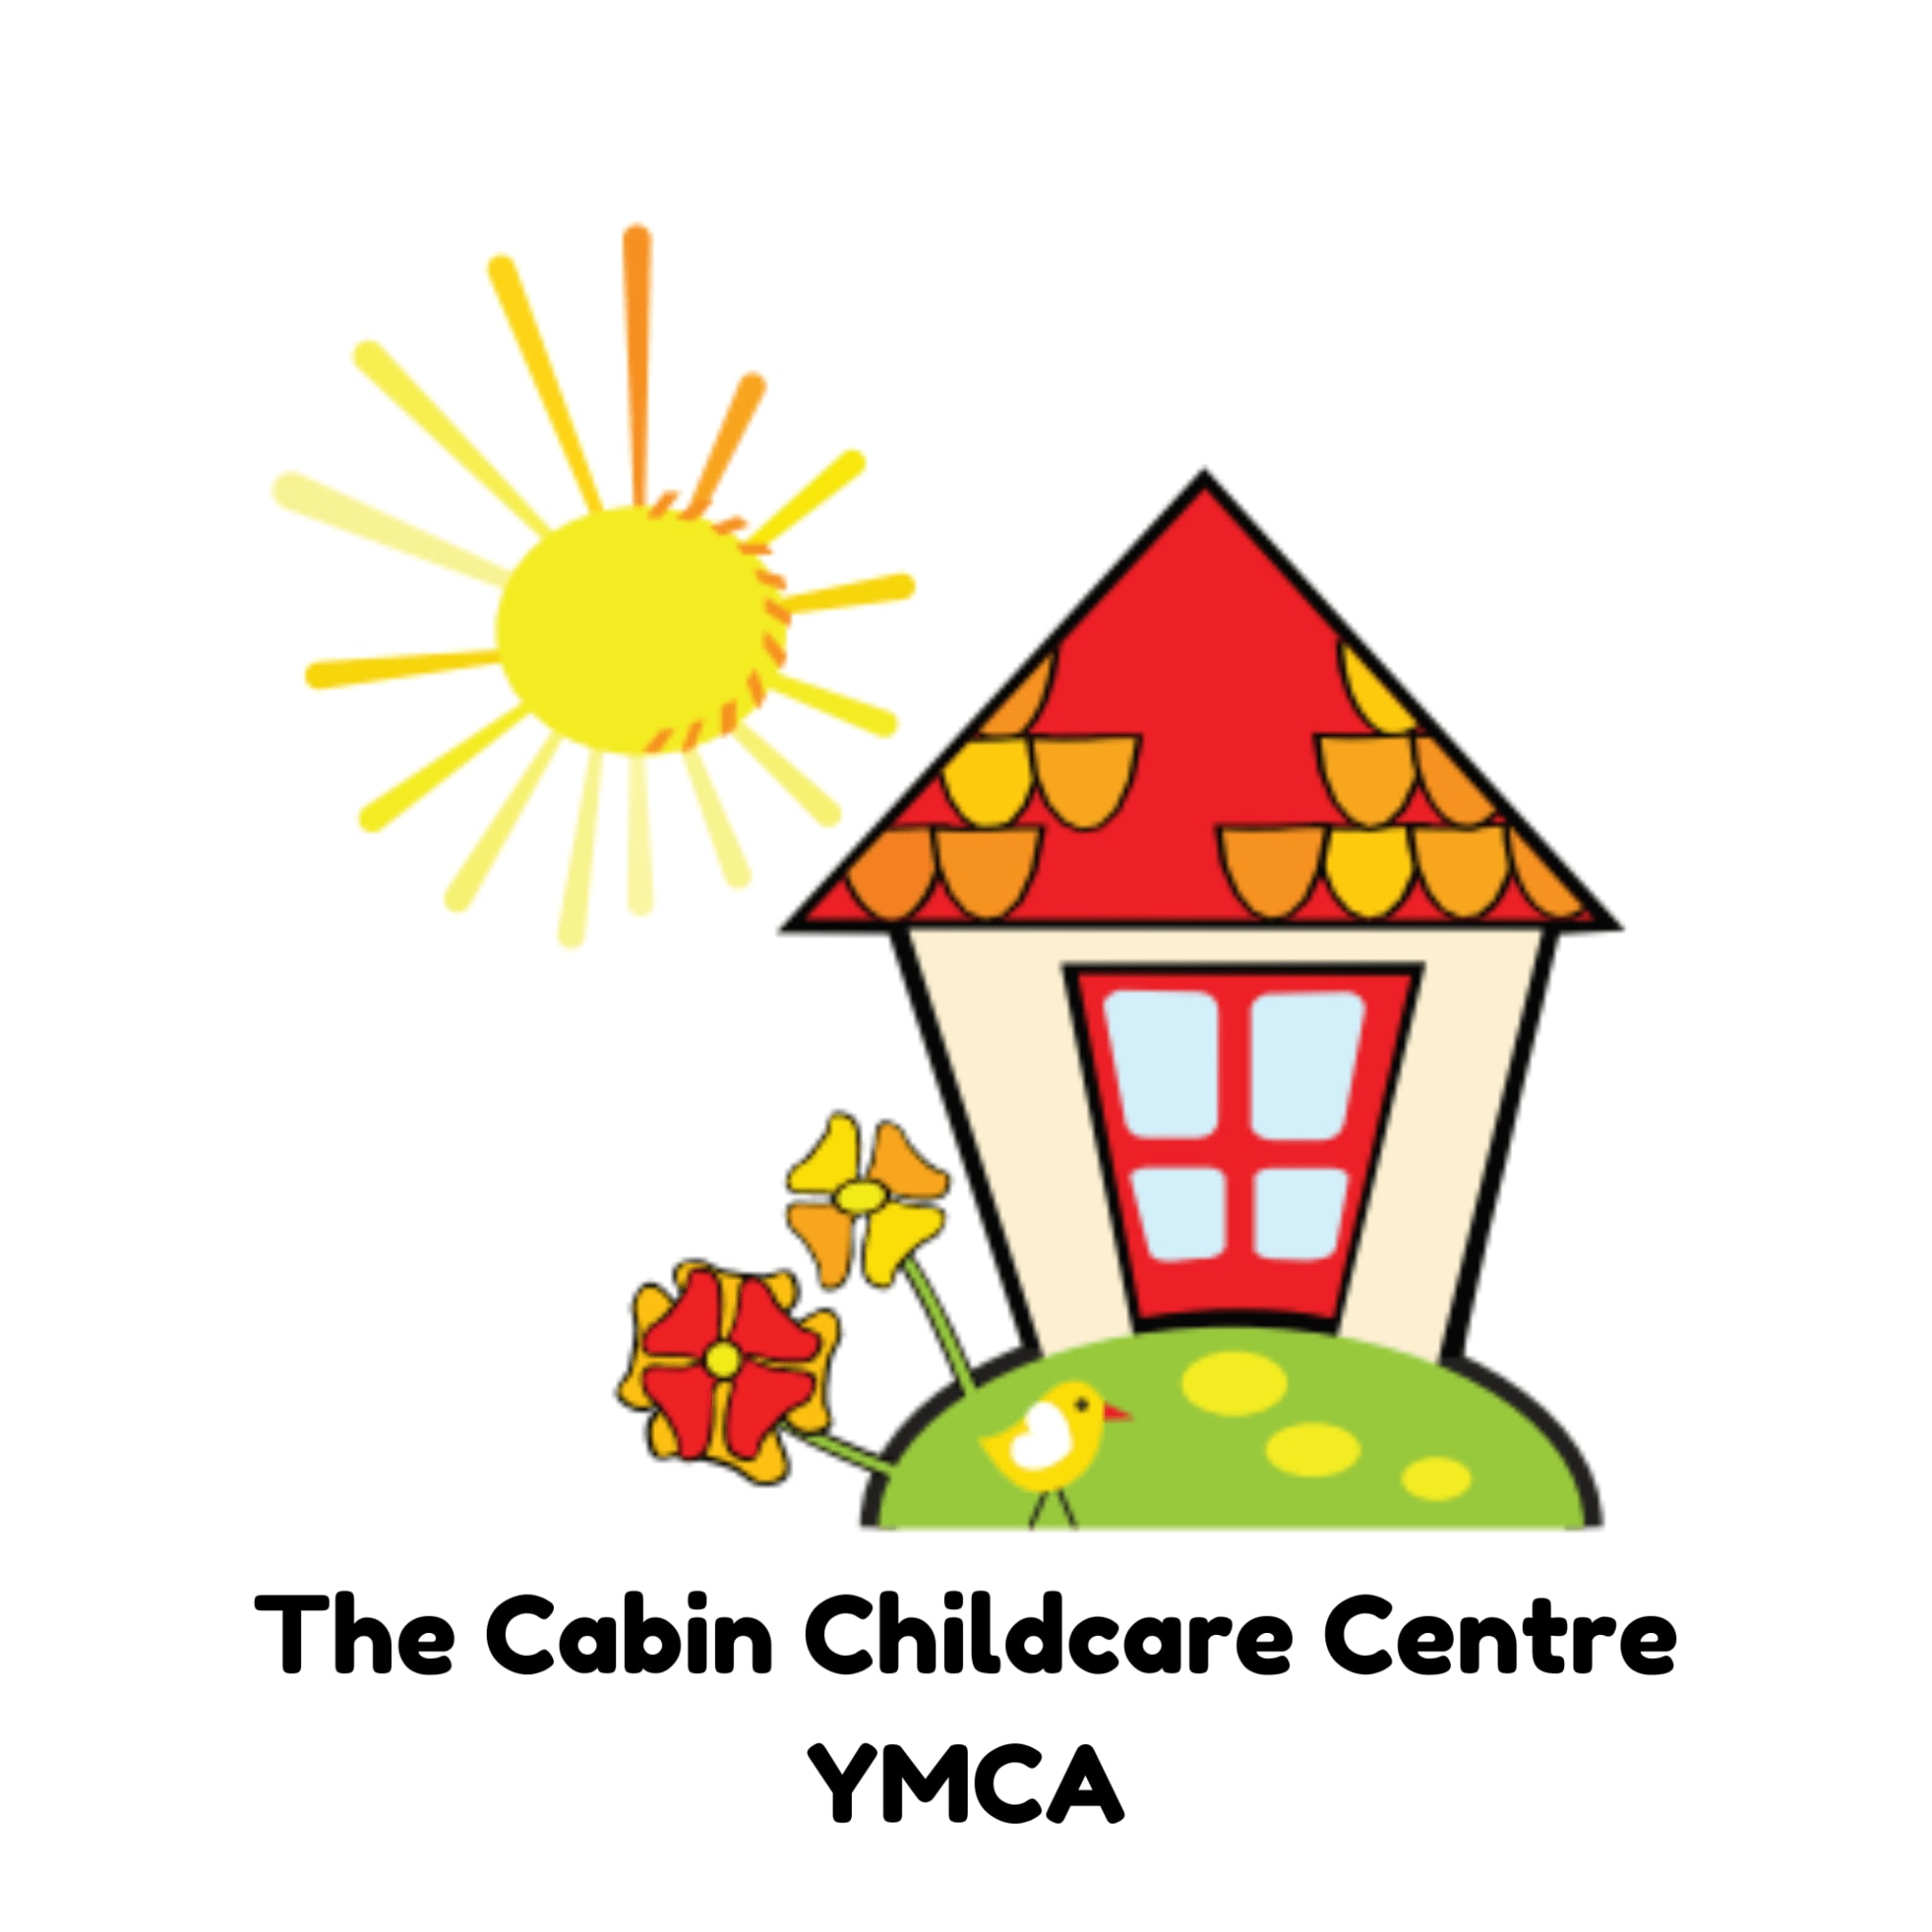 The Cabin Childcare Centre YMCA Logo